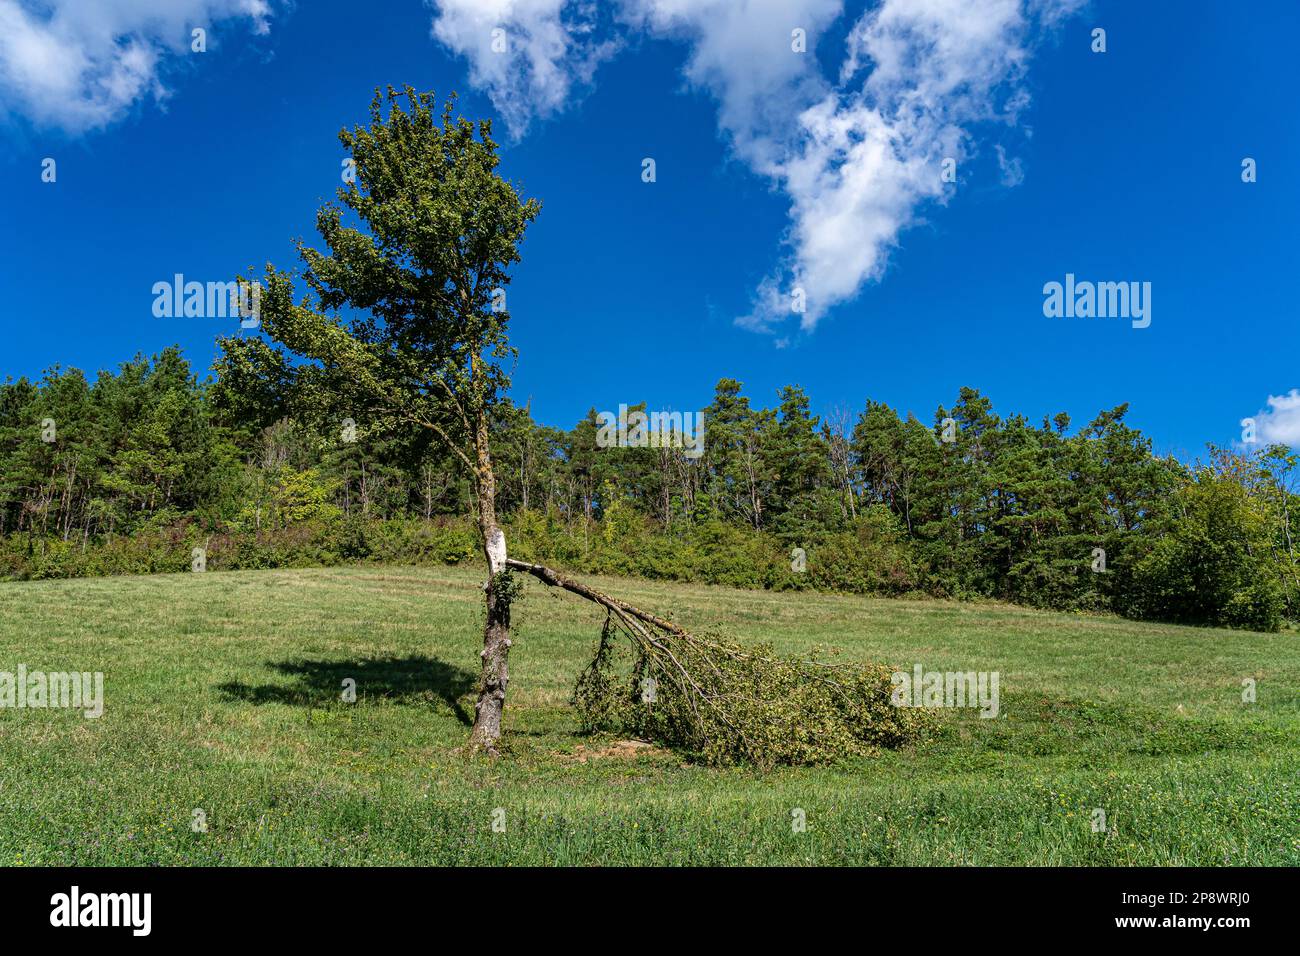 A field near the green forest with a broken tree Stock Photo